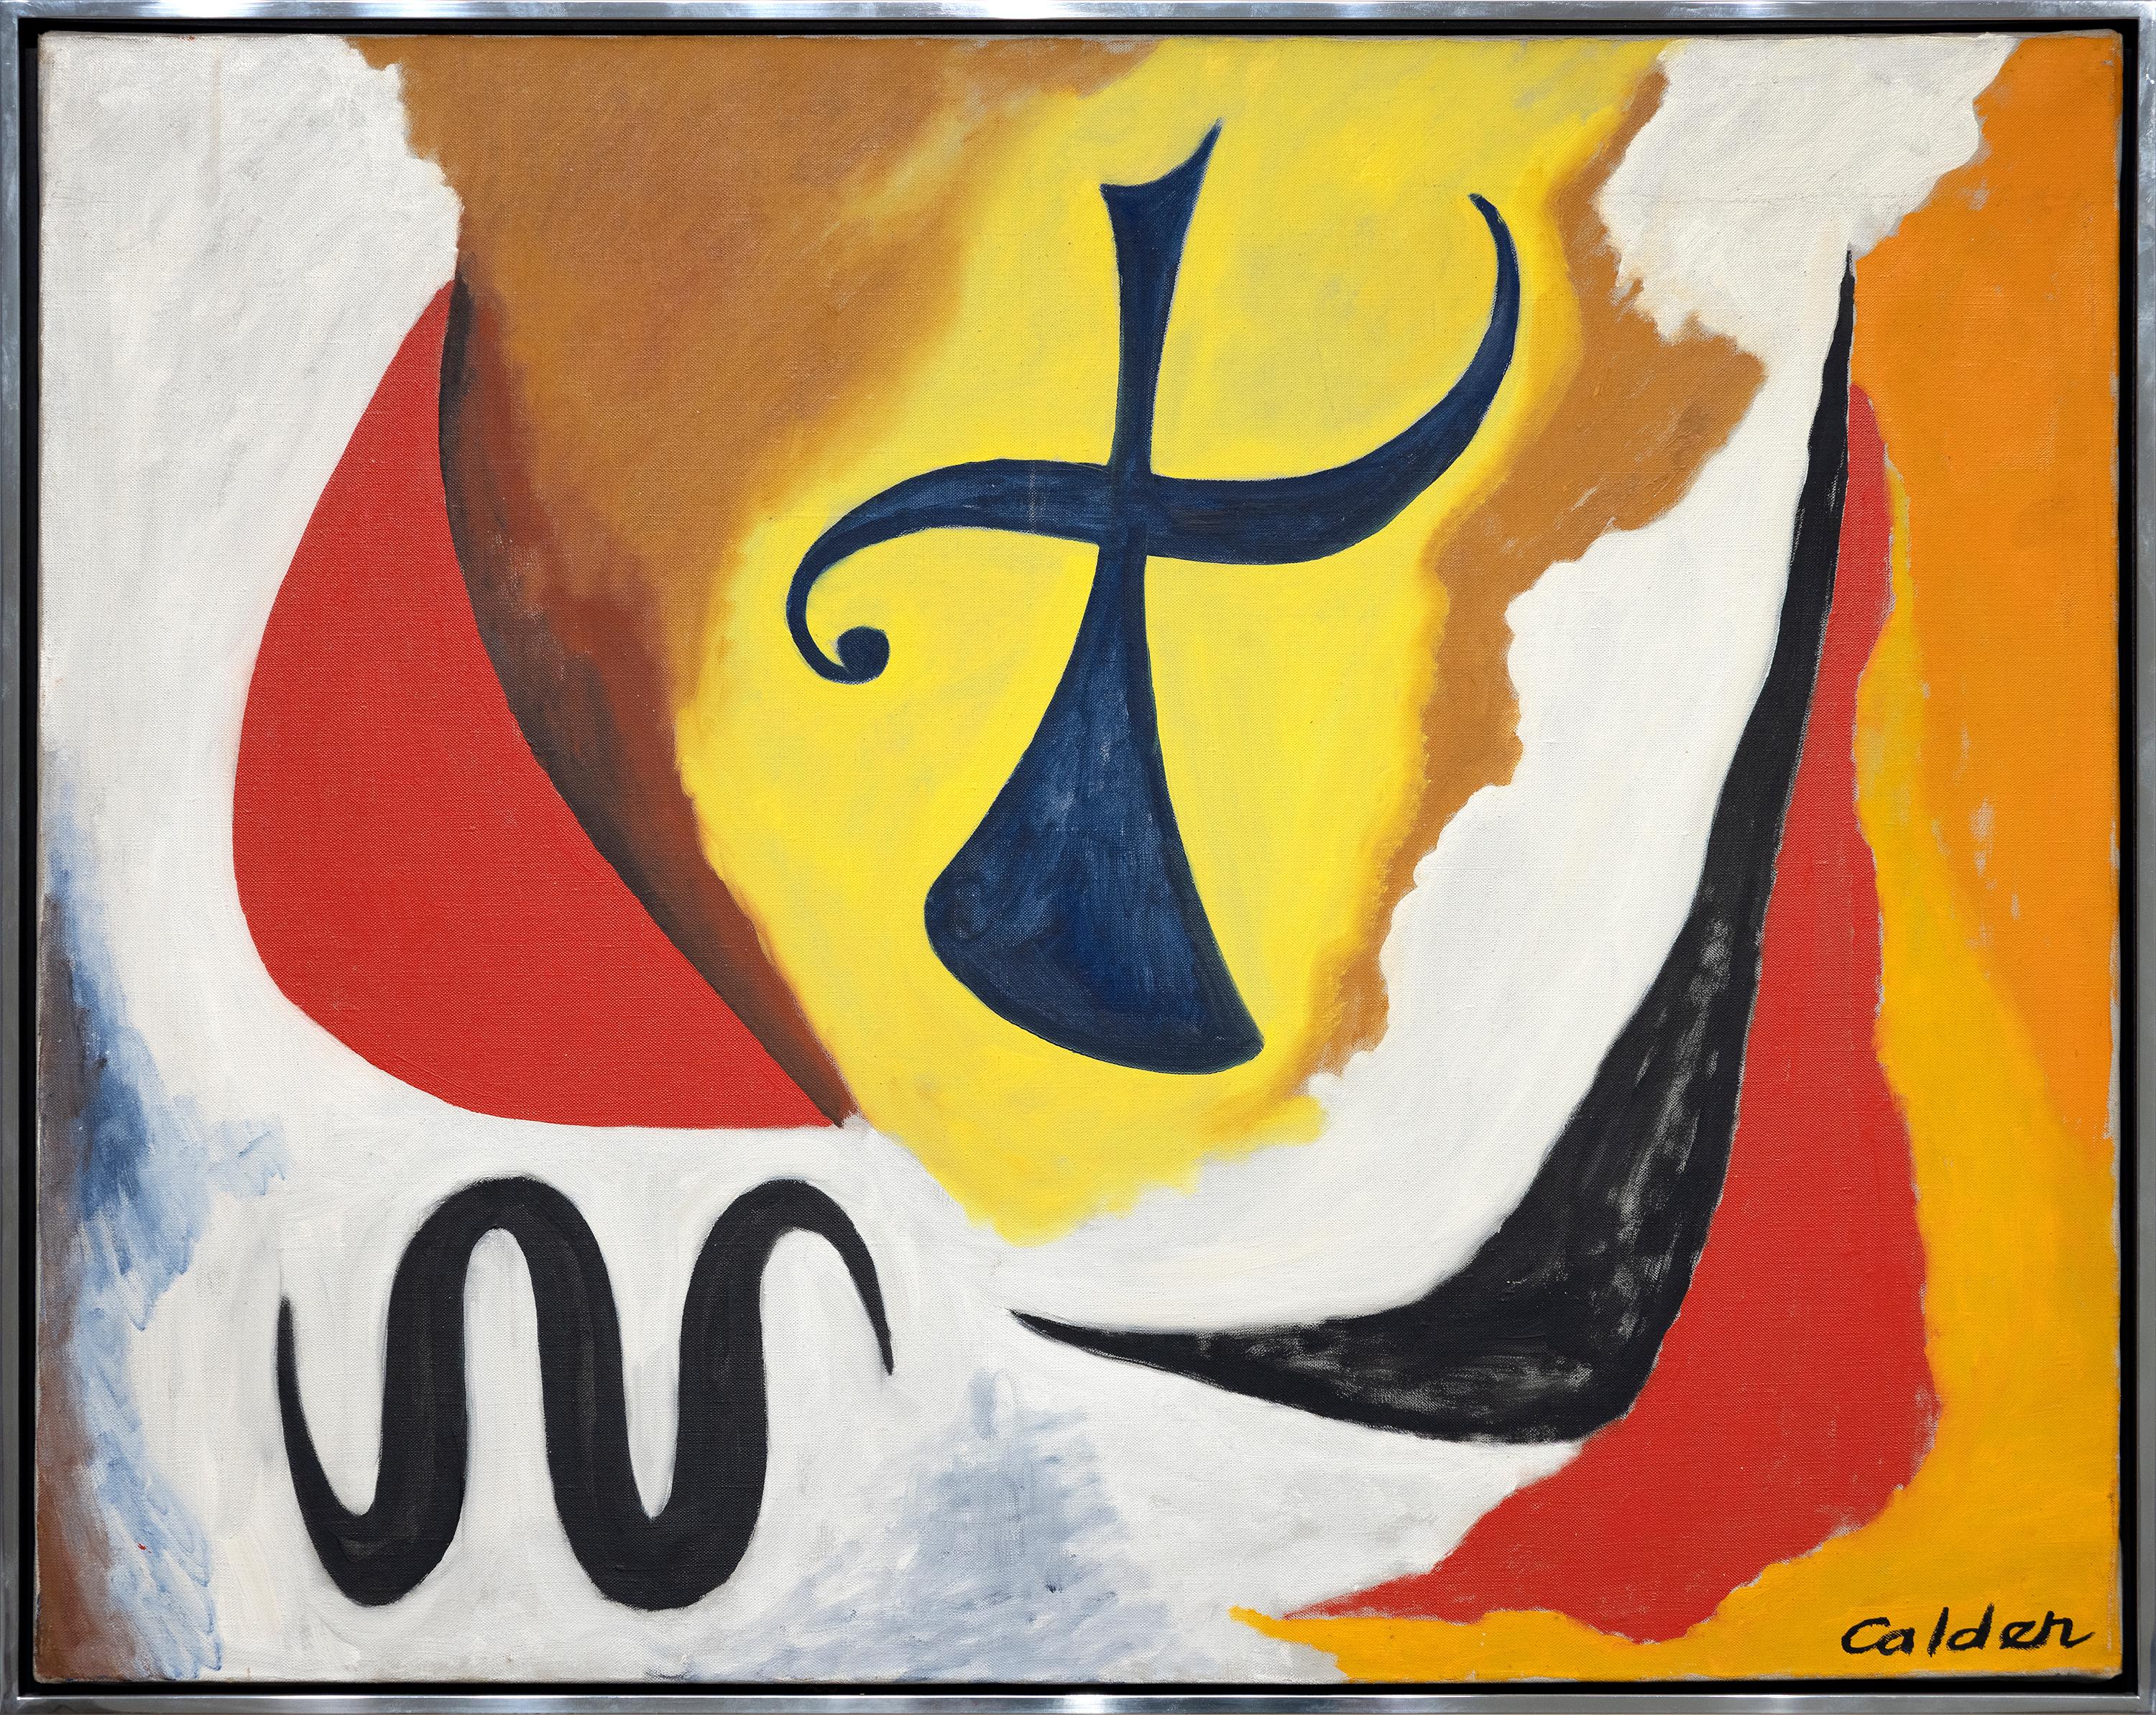 The Cross - Painting by Alexander Calder